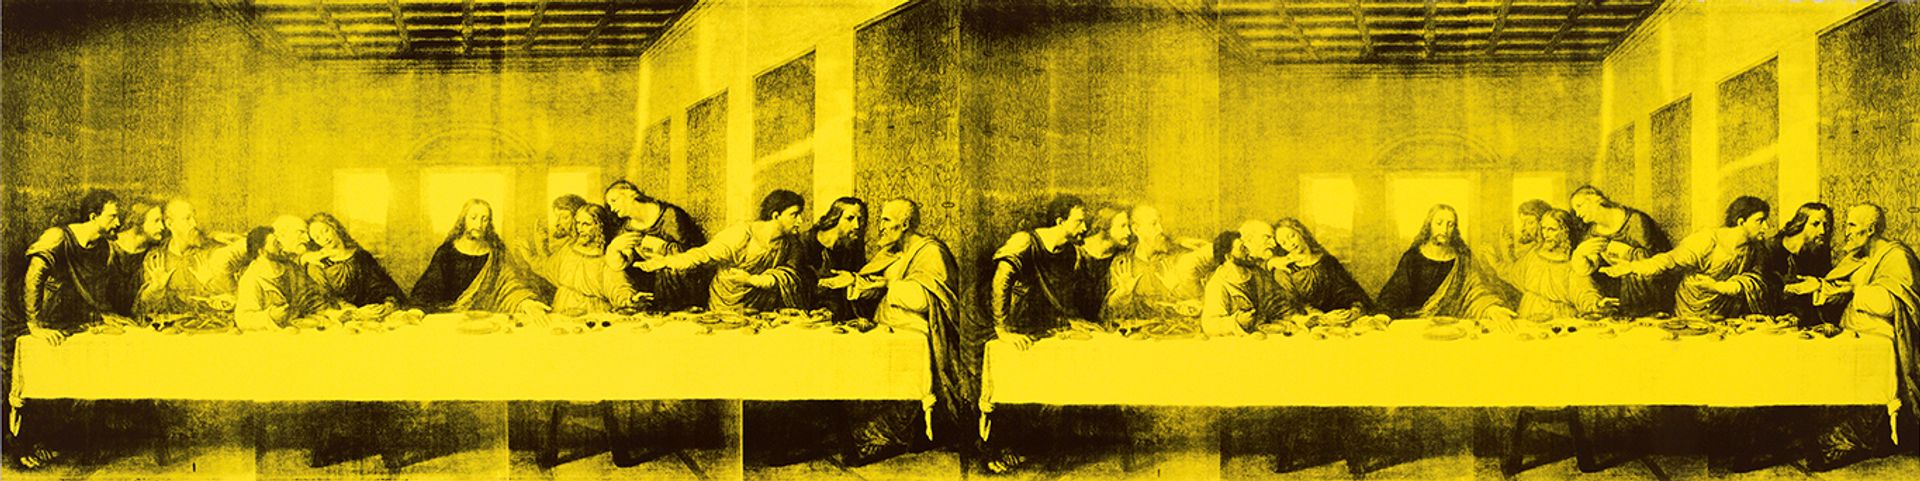 Andy Warhol's The Last Supper (1986), which the Baltimore Museum of Art had proposed to deaccession in a private sale through Sotheby's Courtesy of the Baltimore Museum of Art